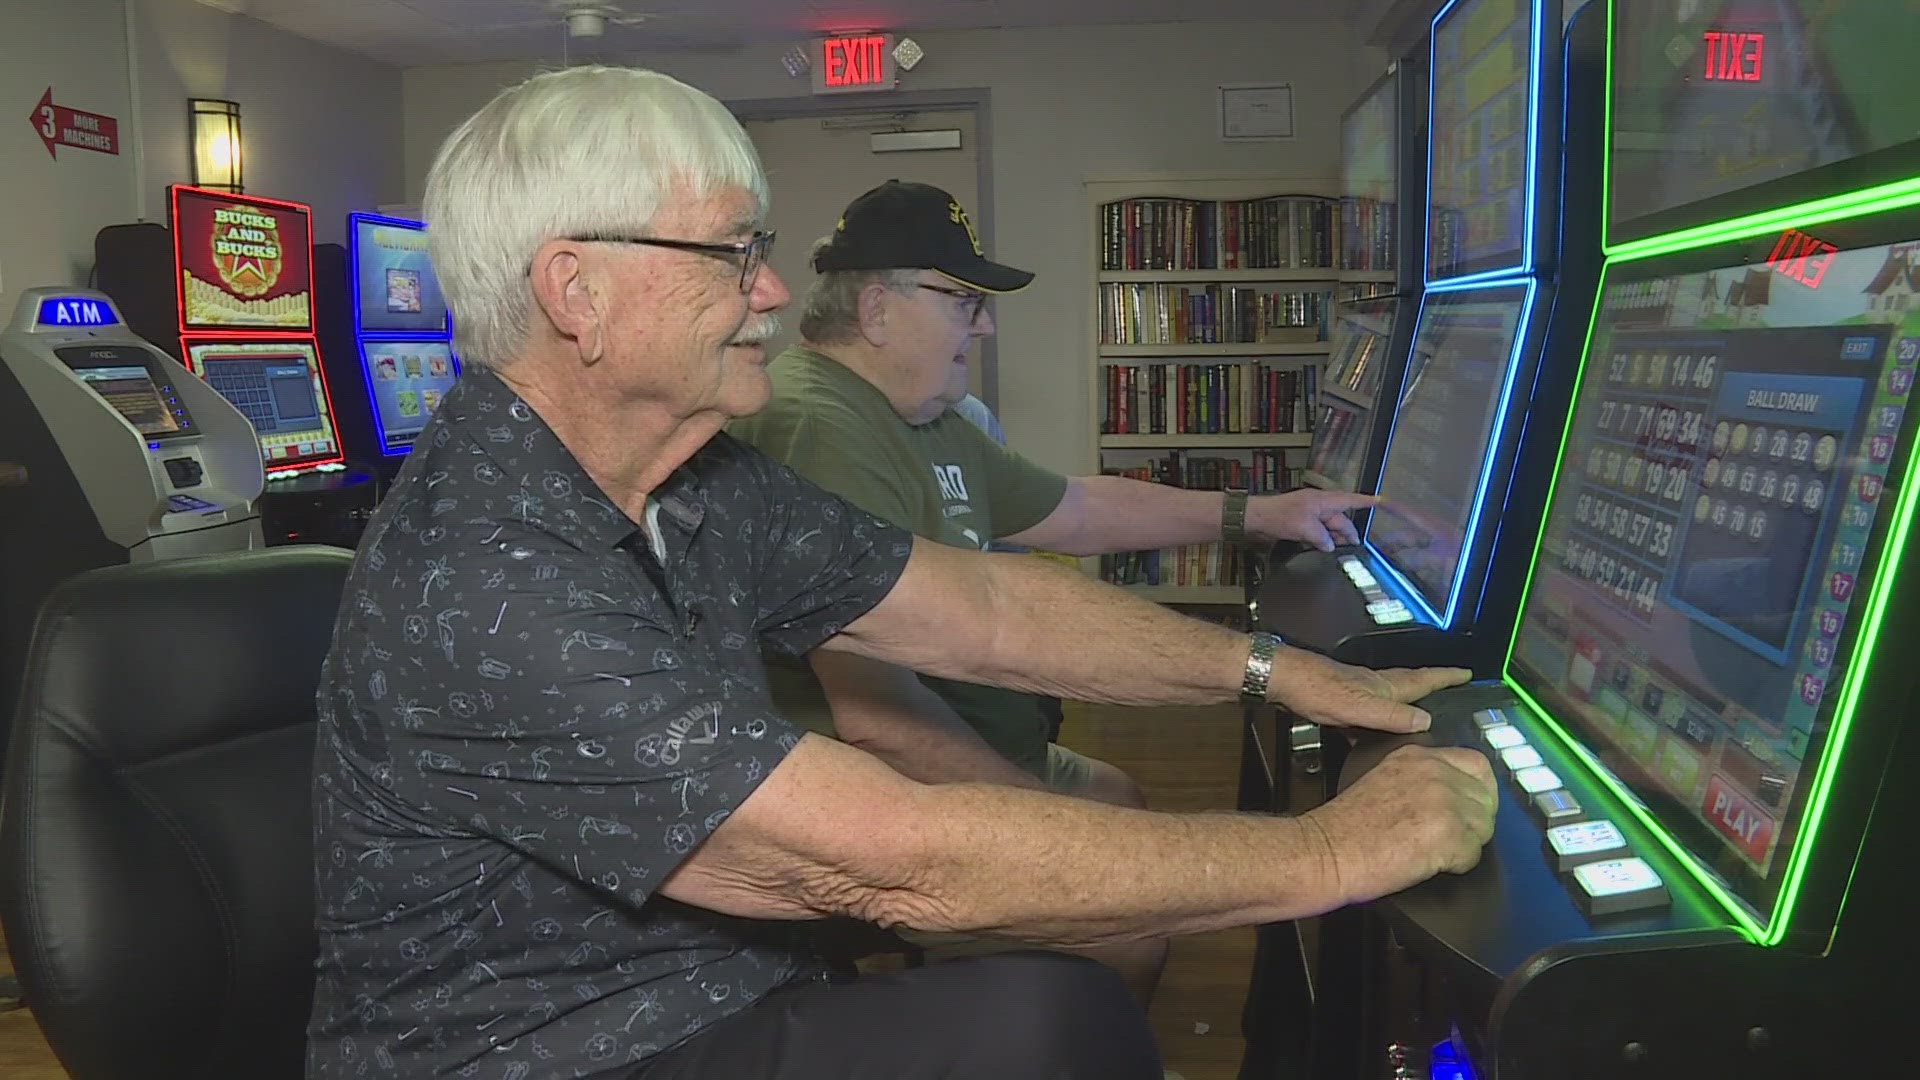 A battle over bingo is unfolding in Arizona, with state regulatory agencies saying certain bingo games played on machines at veterans organizations are illegal.